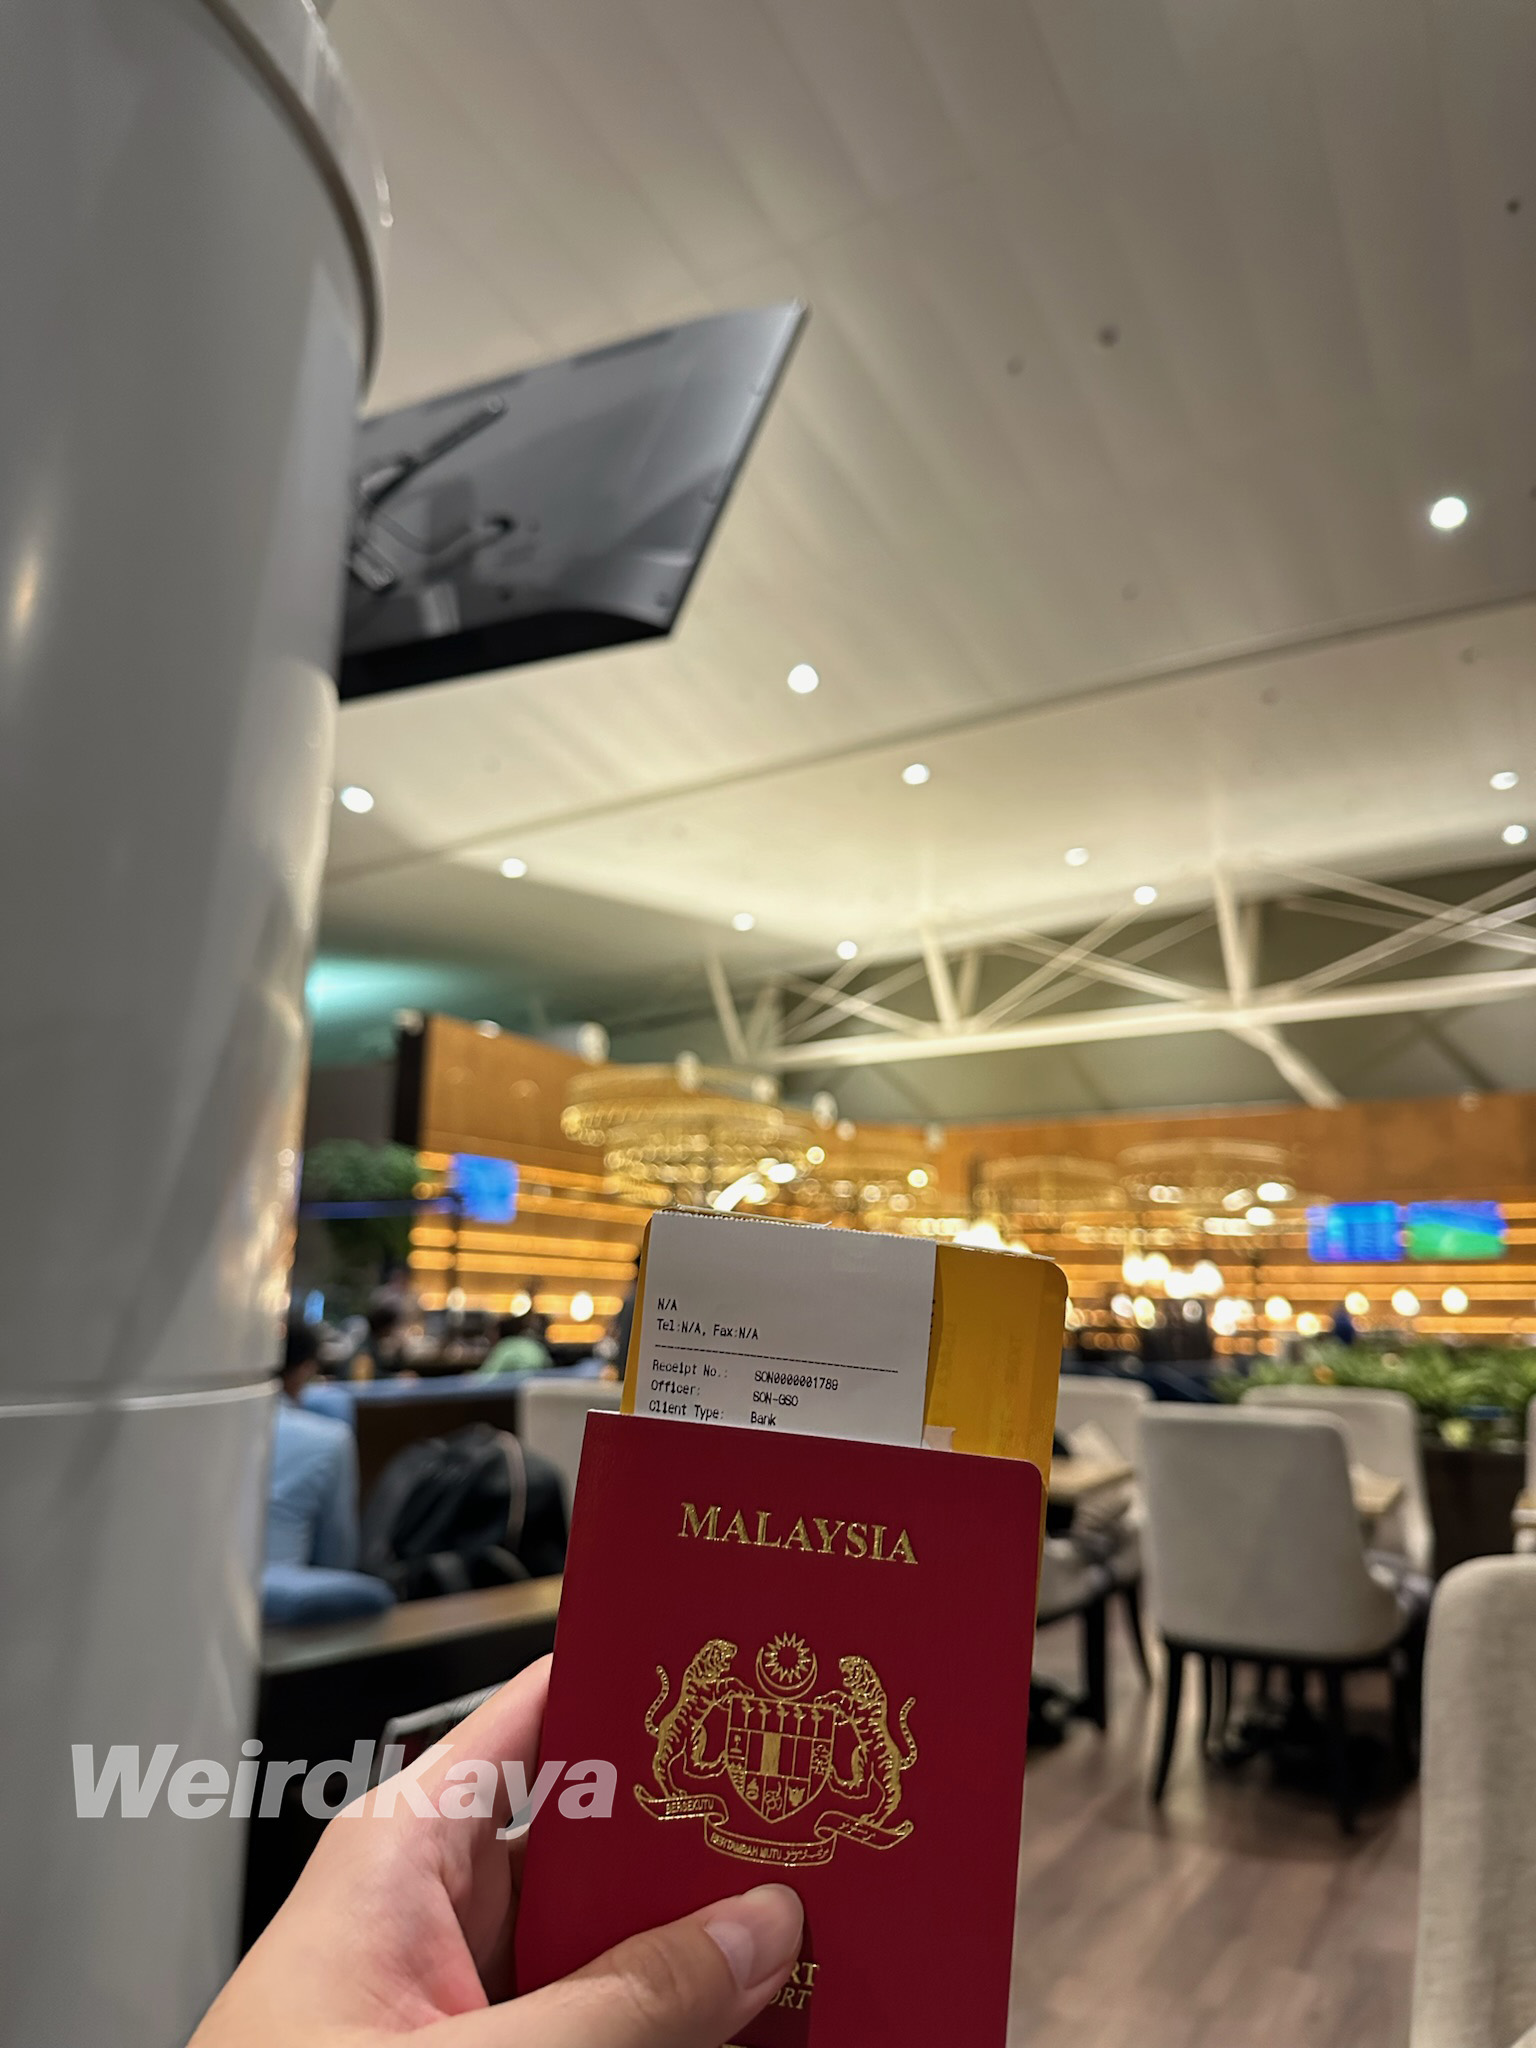 S'pore stays as world's most powerful passport, m'sia remains at 44th place | weirdkaya